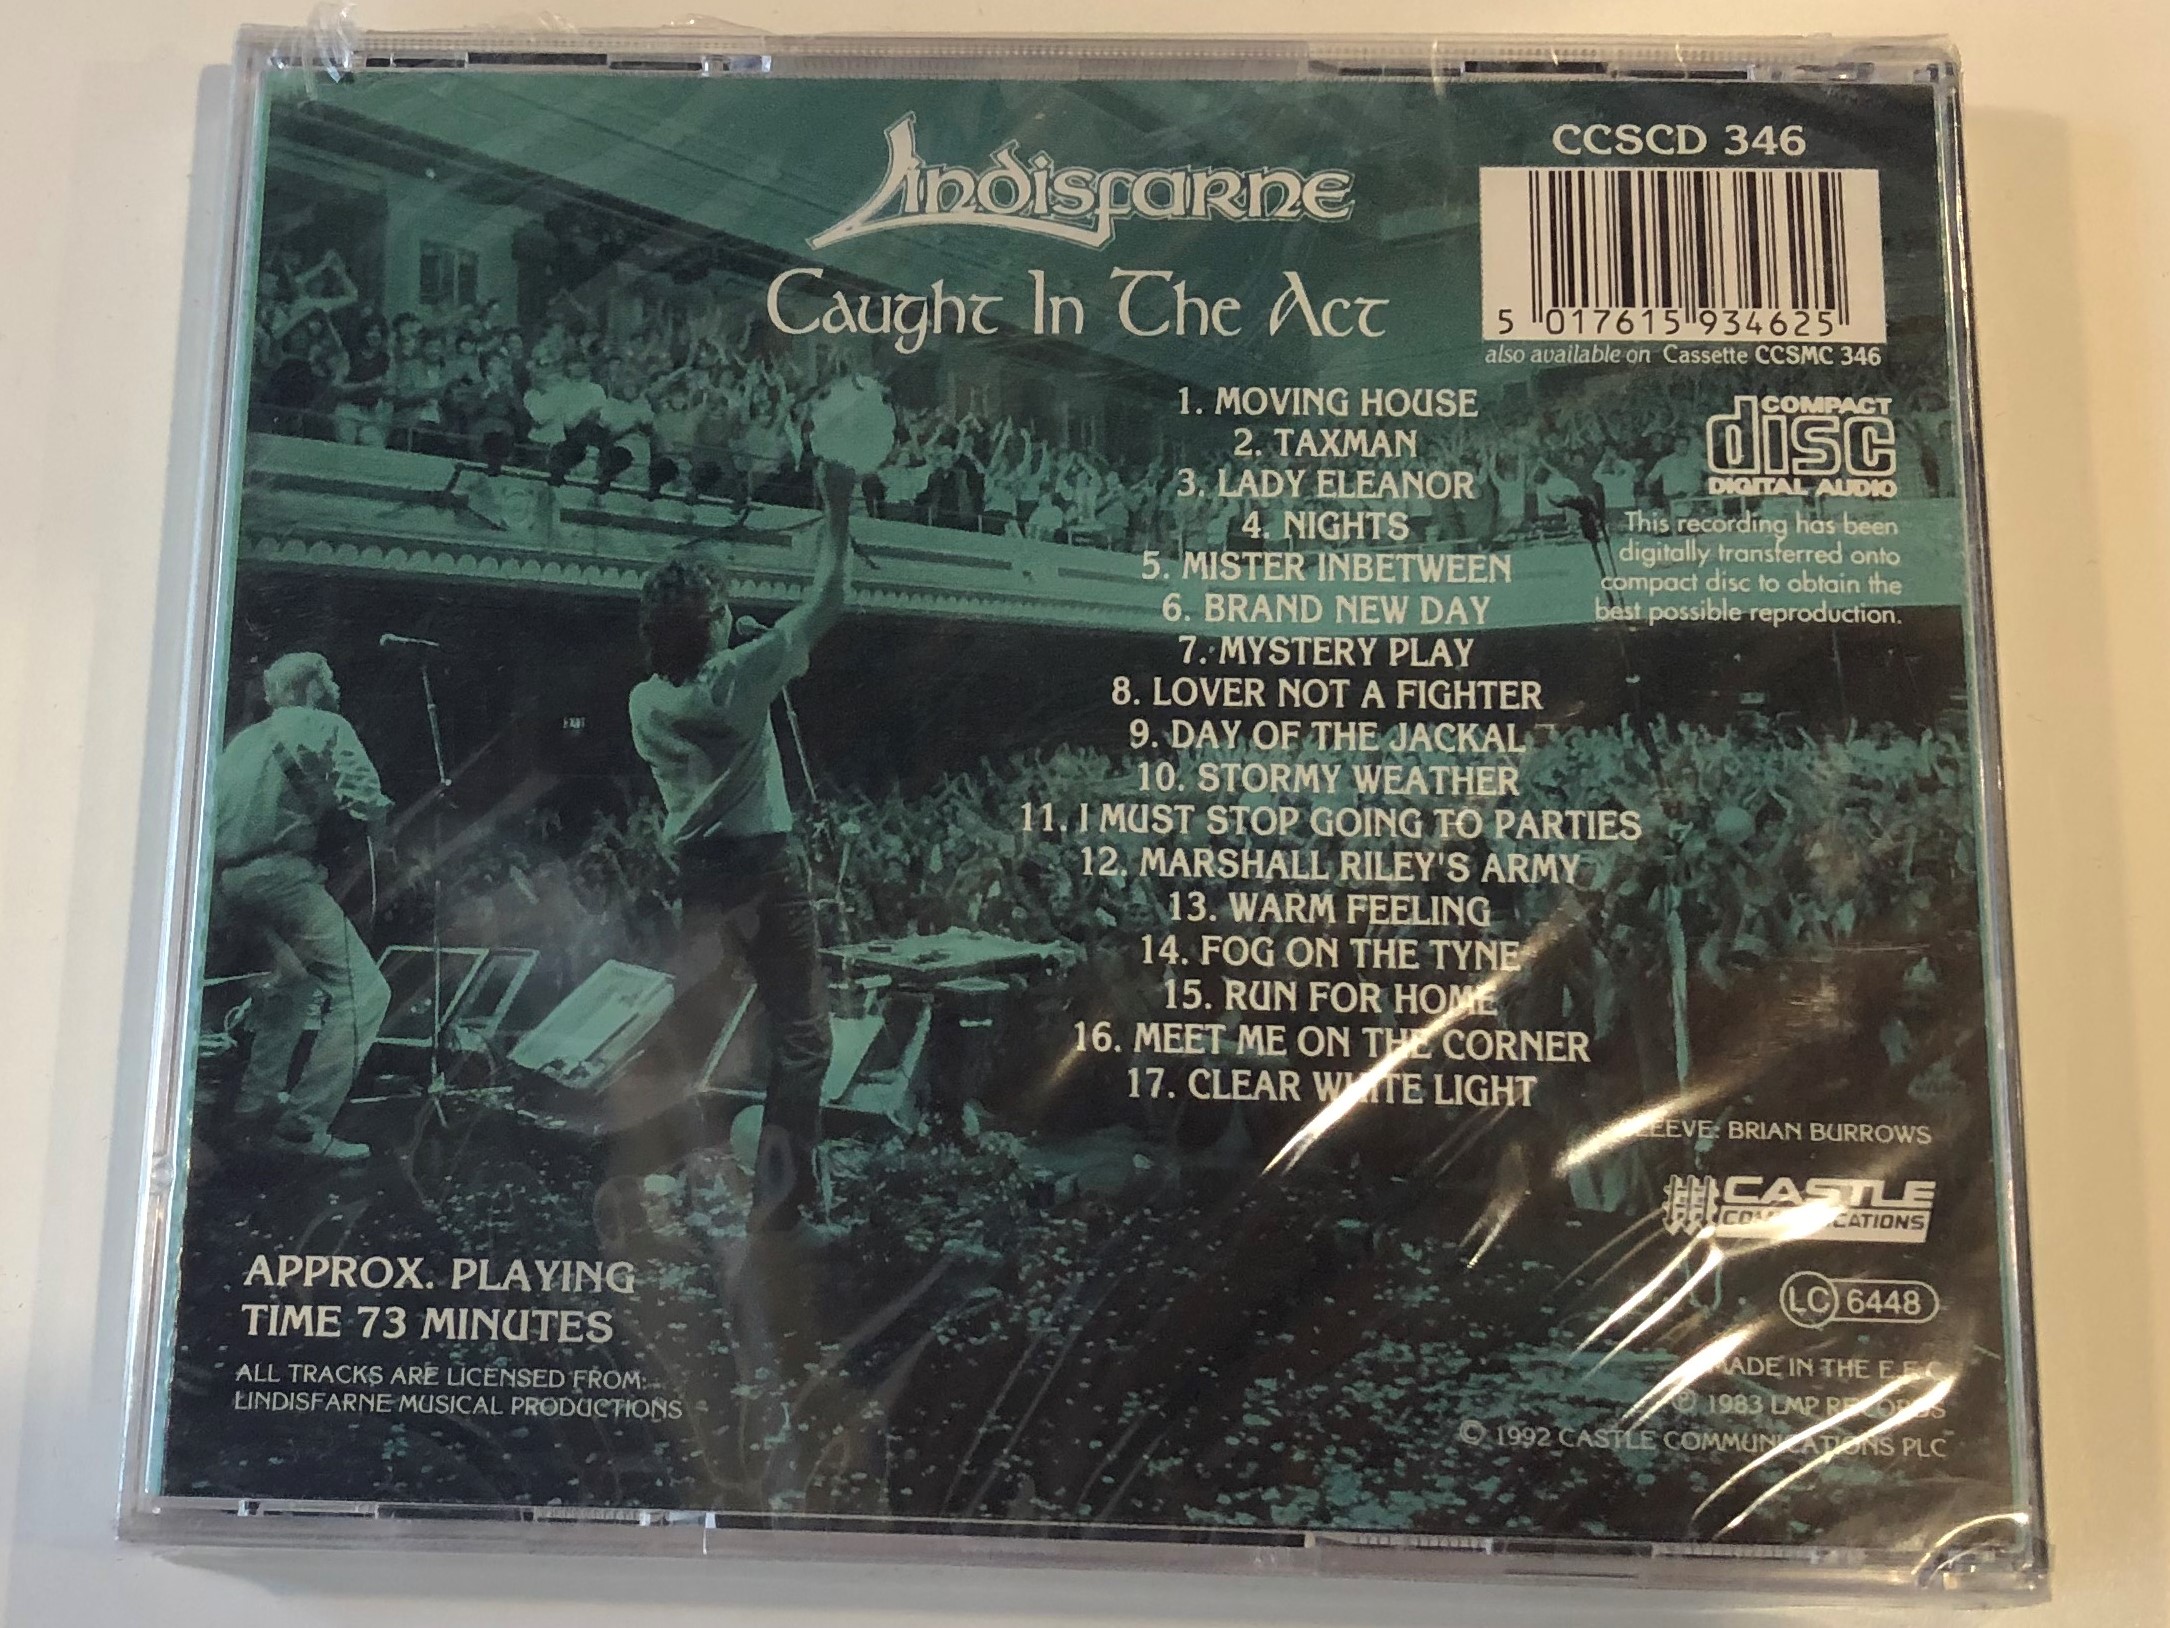 lindisfarne-caught-in-the-act-the-collection-series-castle-communications-audio-cd-1992-ccscd-346-2-.jpg